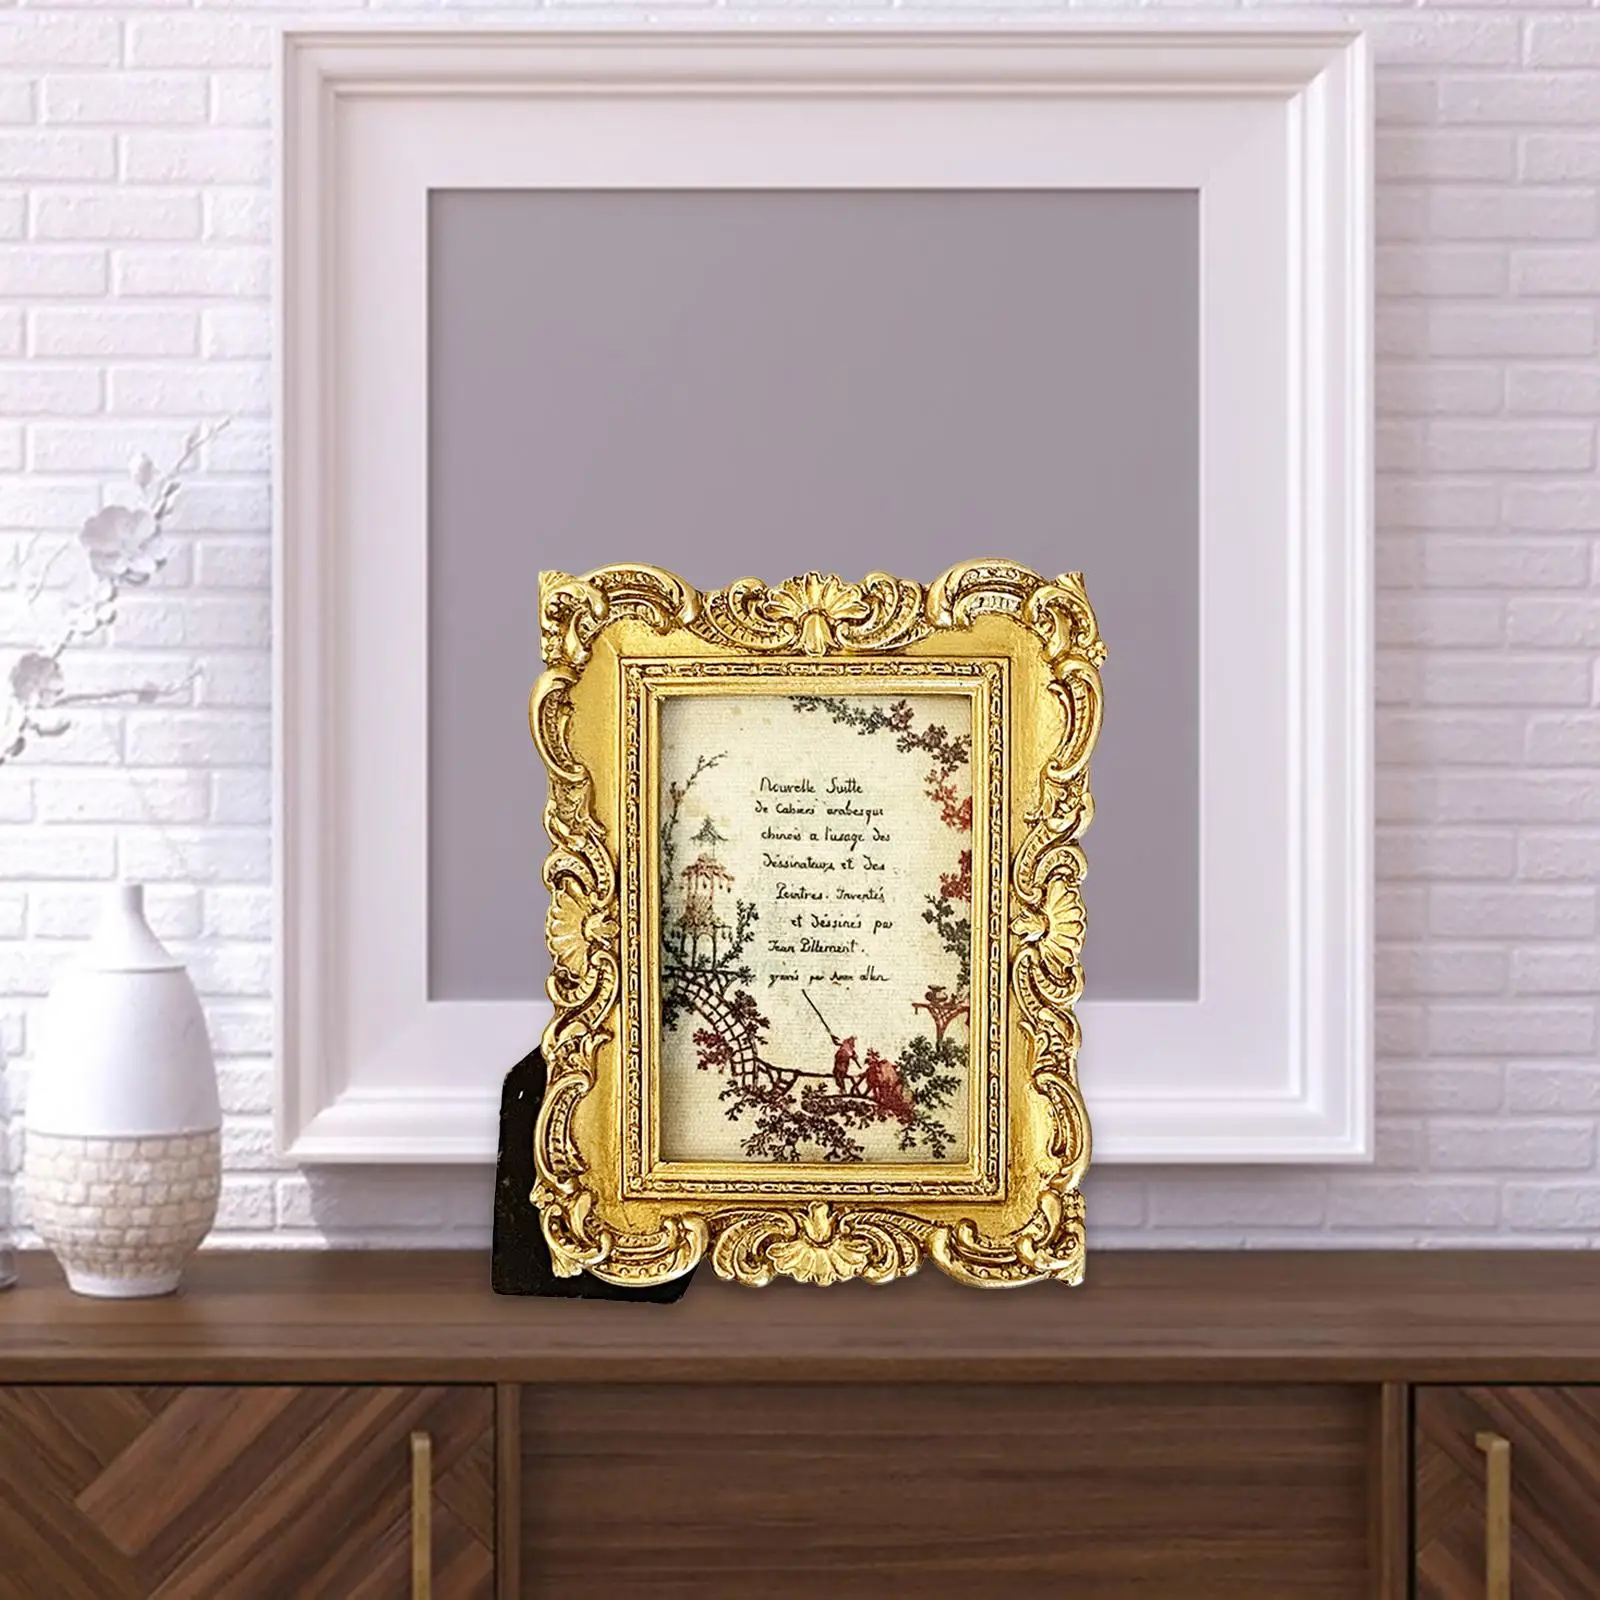 Antique Photo Frame Resin Golden Carved Photo Gallery Art Ornate Desktop and Wall Hanging for Retro Home Decor Gift Ideas